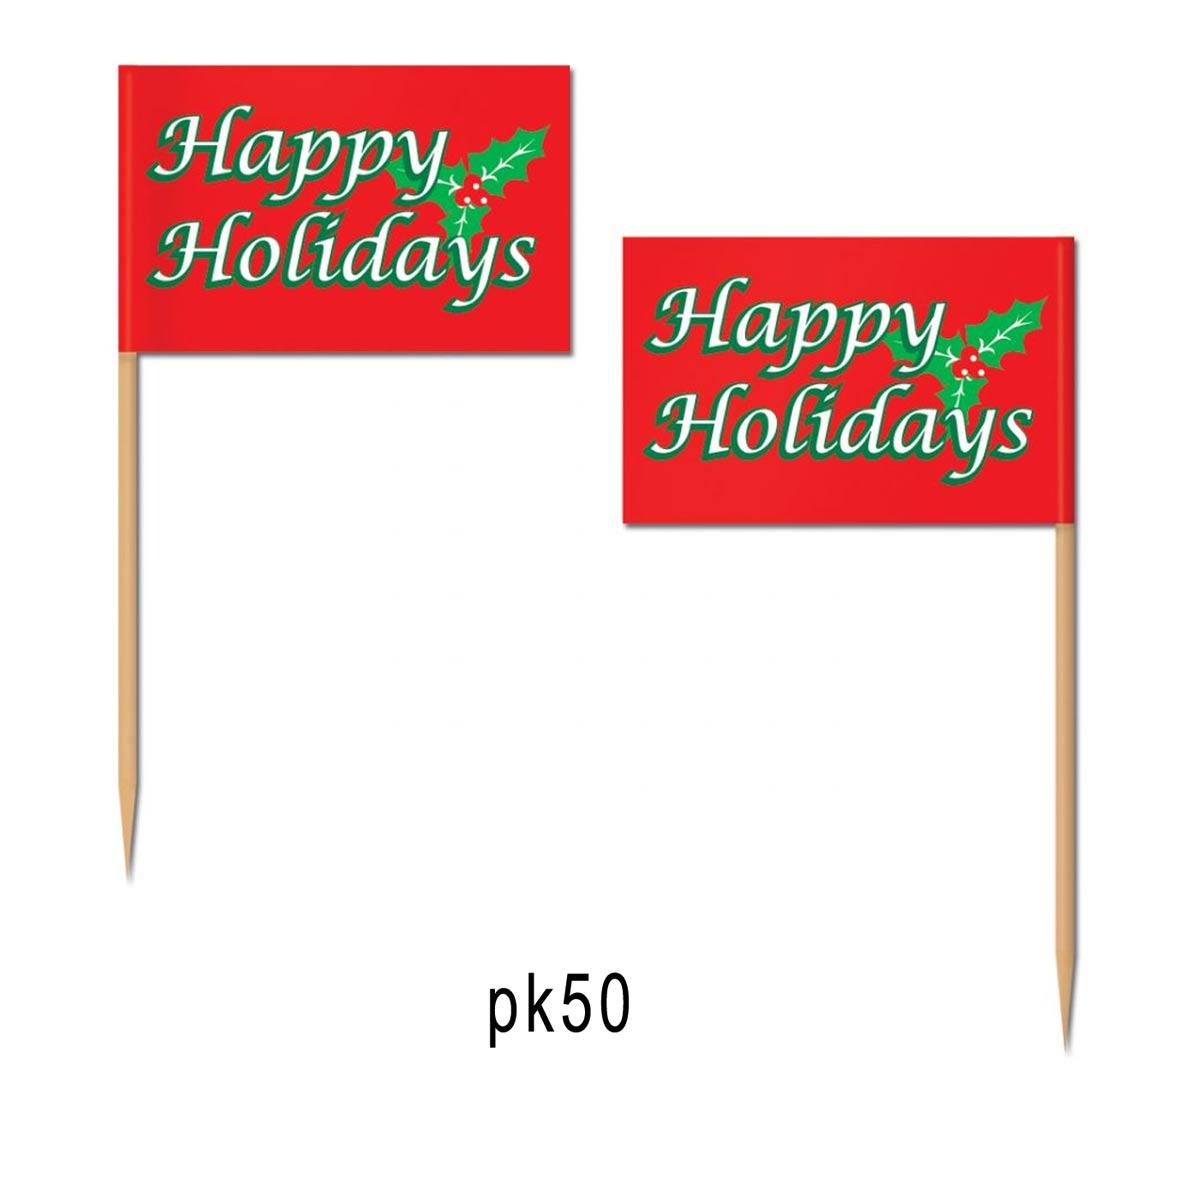 Christmas Holiday Flag Picks - Pkt 50 Red and Green by Beistle 20126 available here at Karnival Costumes online Christmas party shop